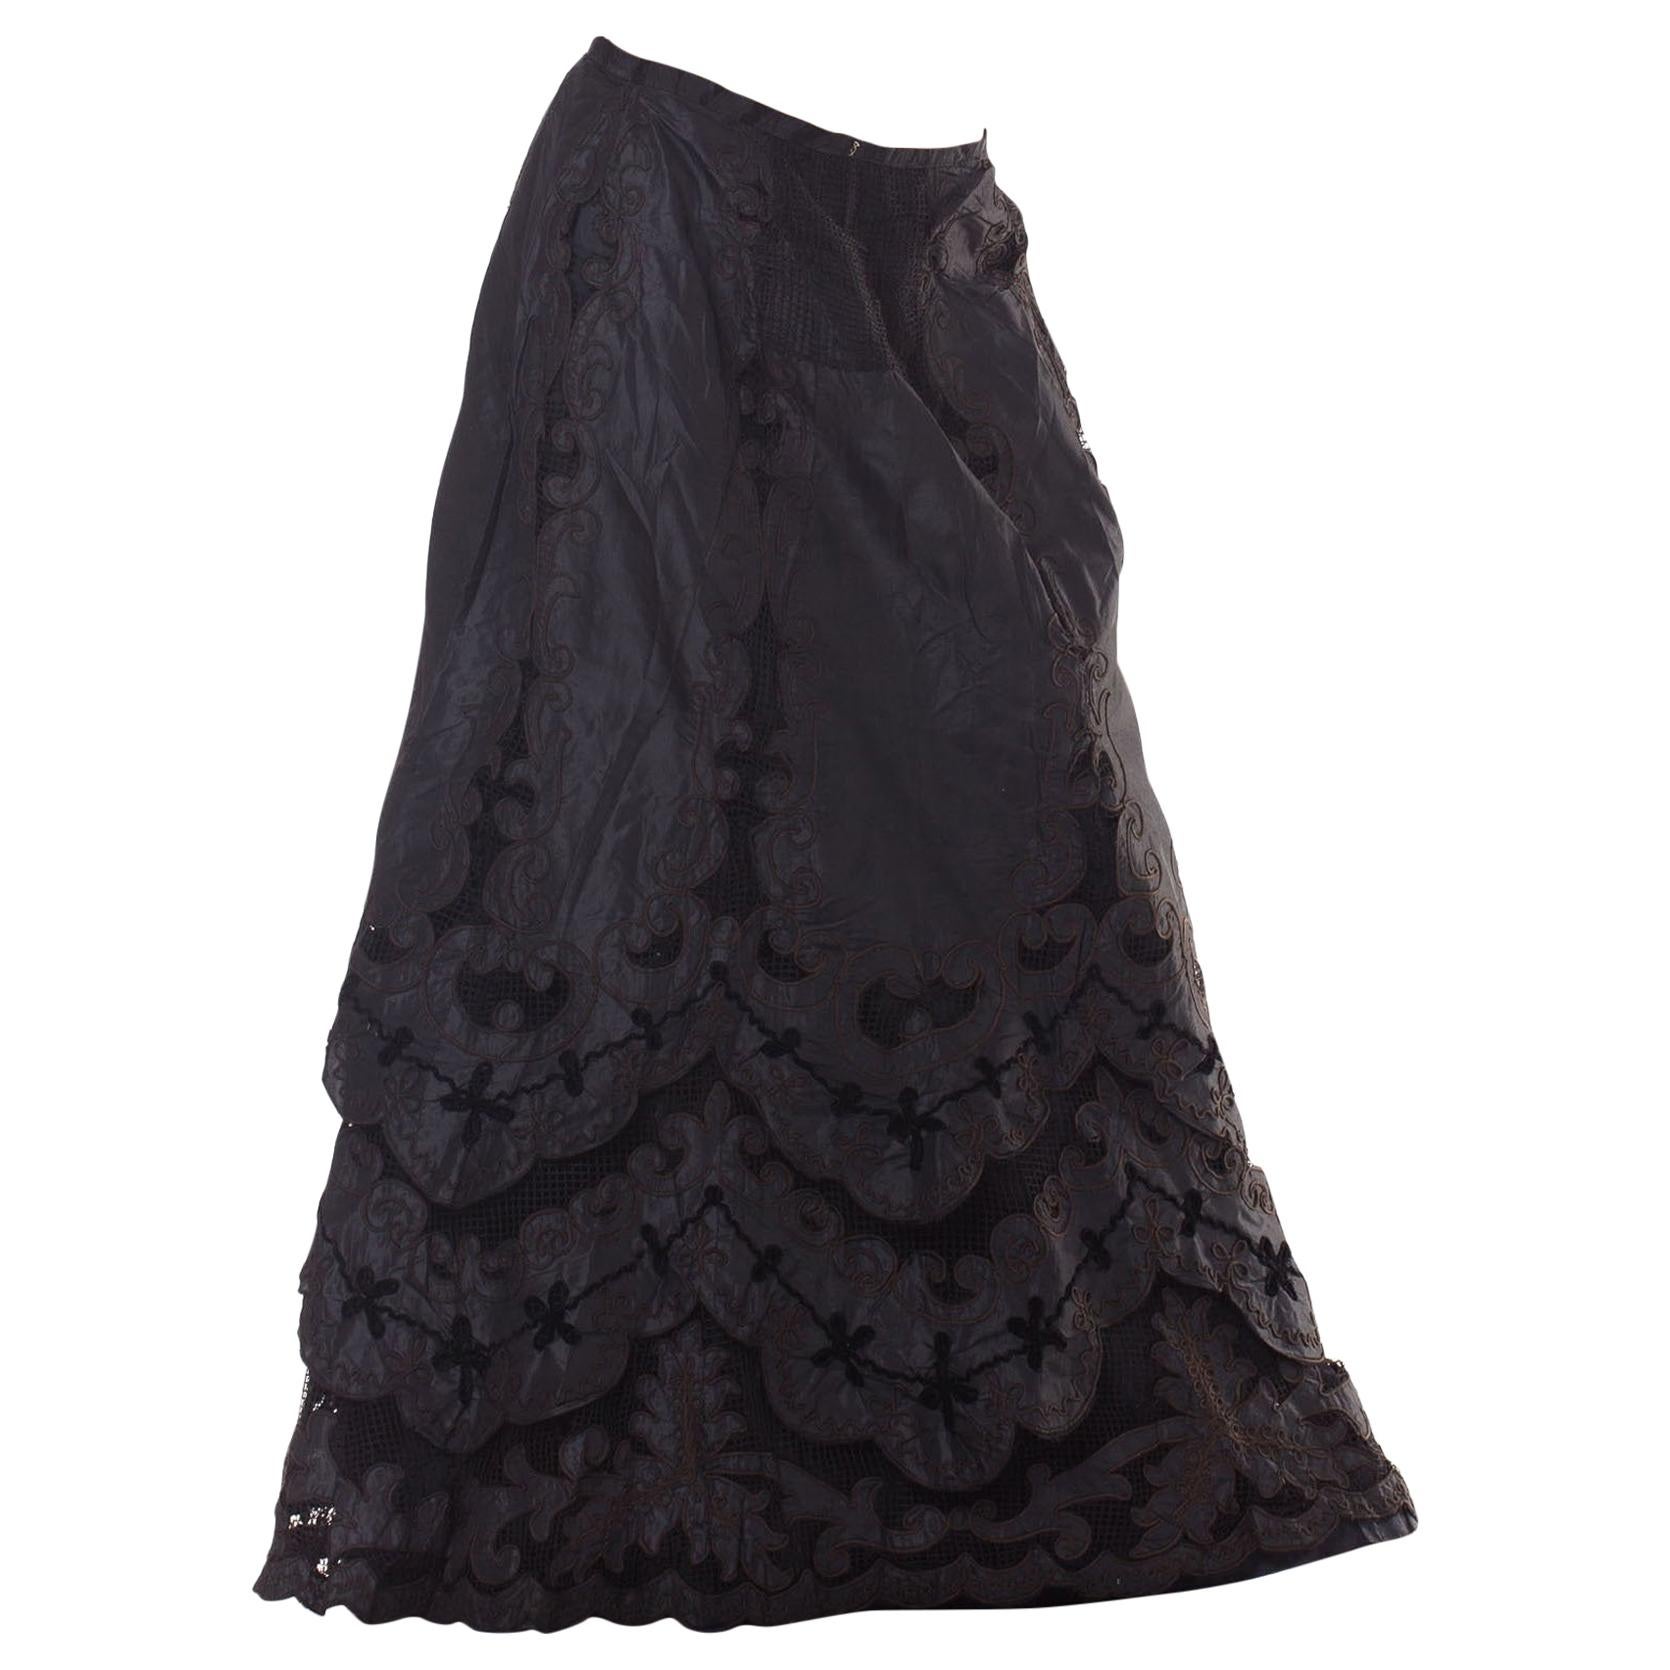 1800S Black Victorian Silk & Lace Tiered Skirt With Appliqués For Sale